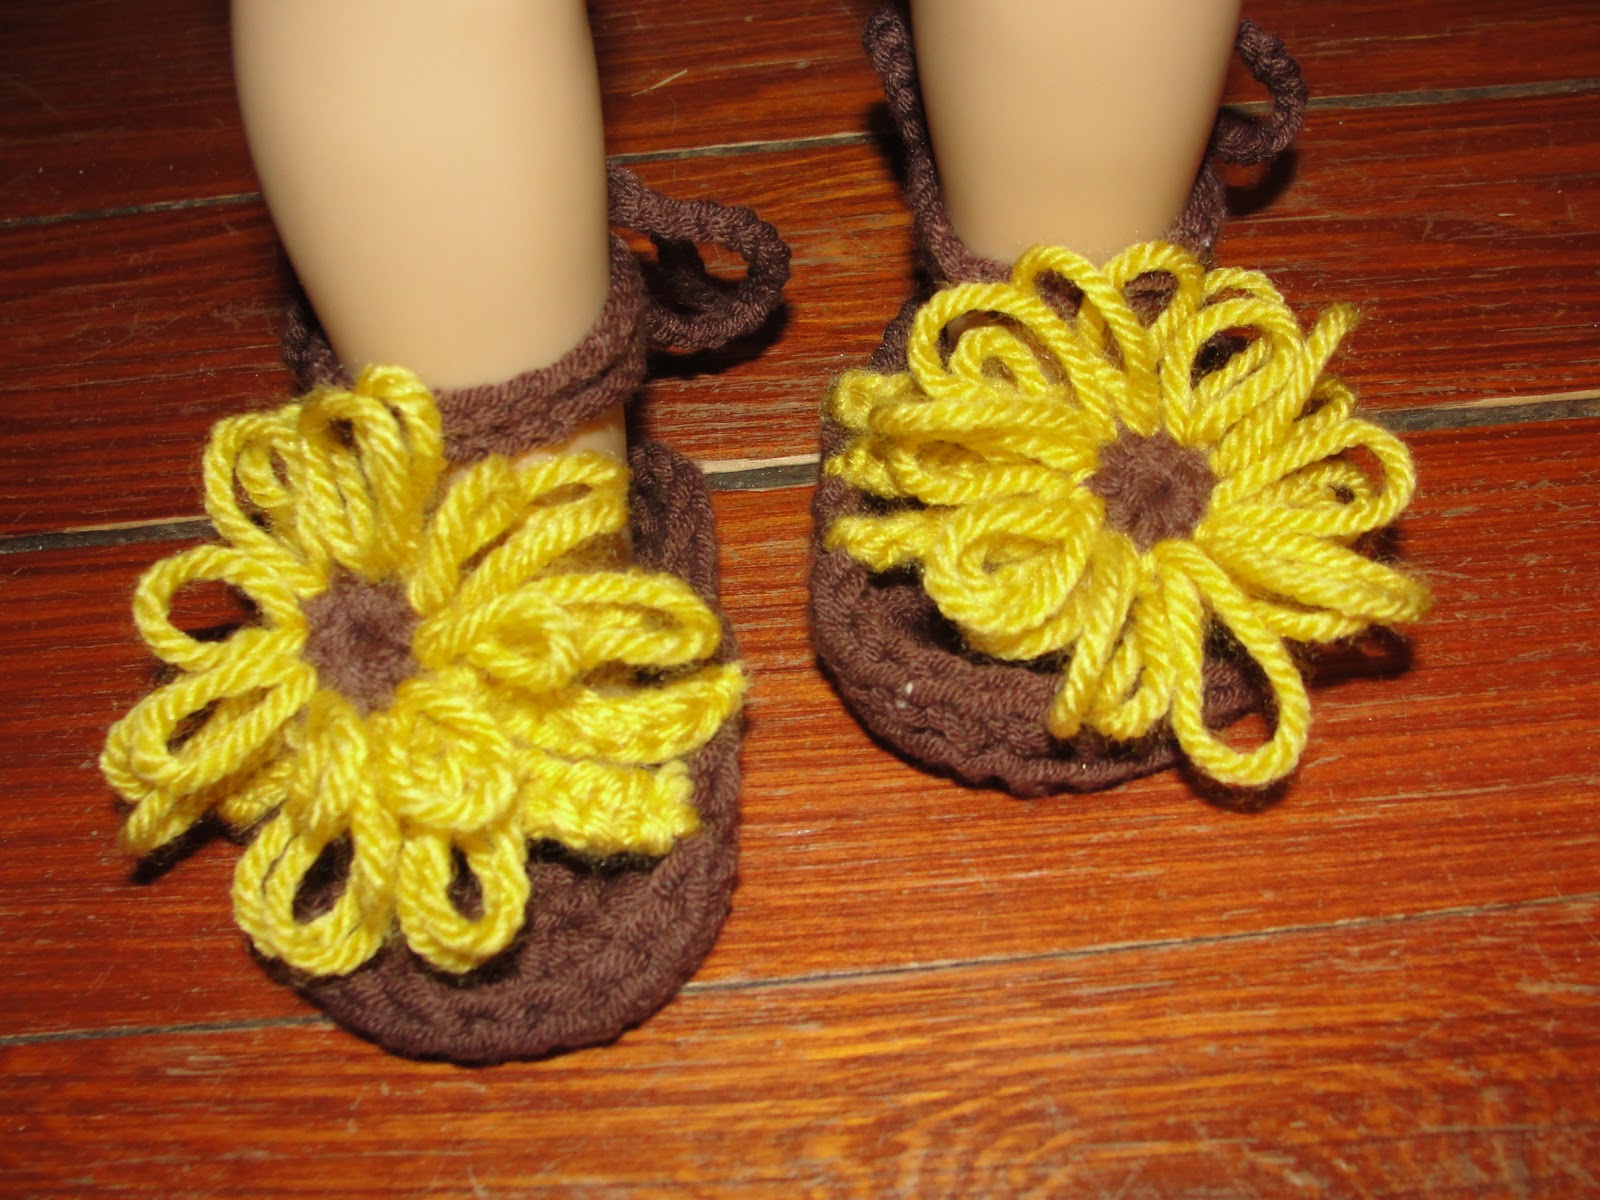 60+ Adorable and FREE Crochet Baby Sandals Patterns --> Baby Strap Sandals